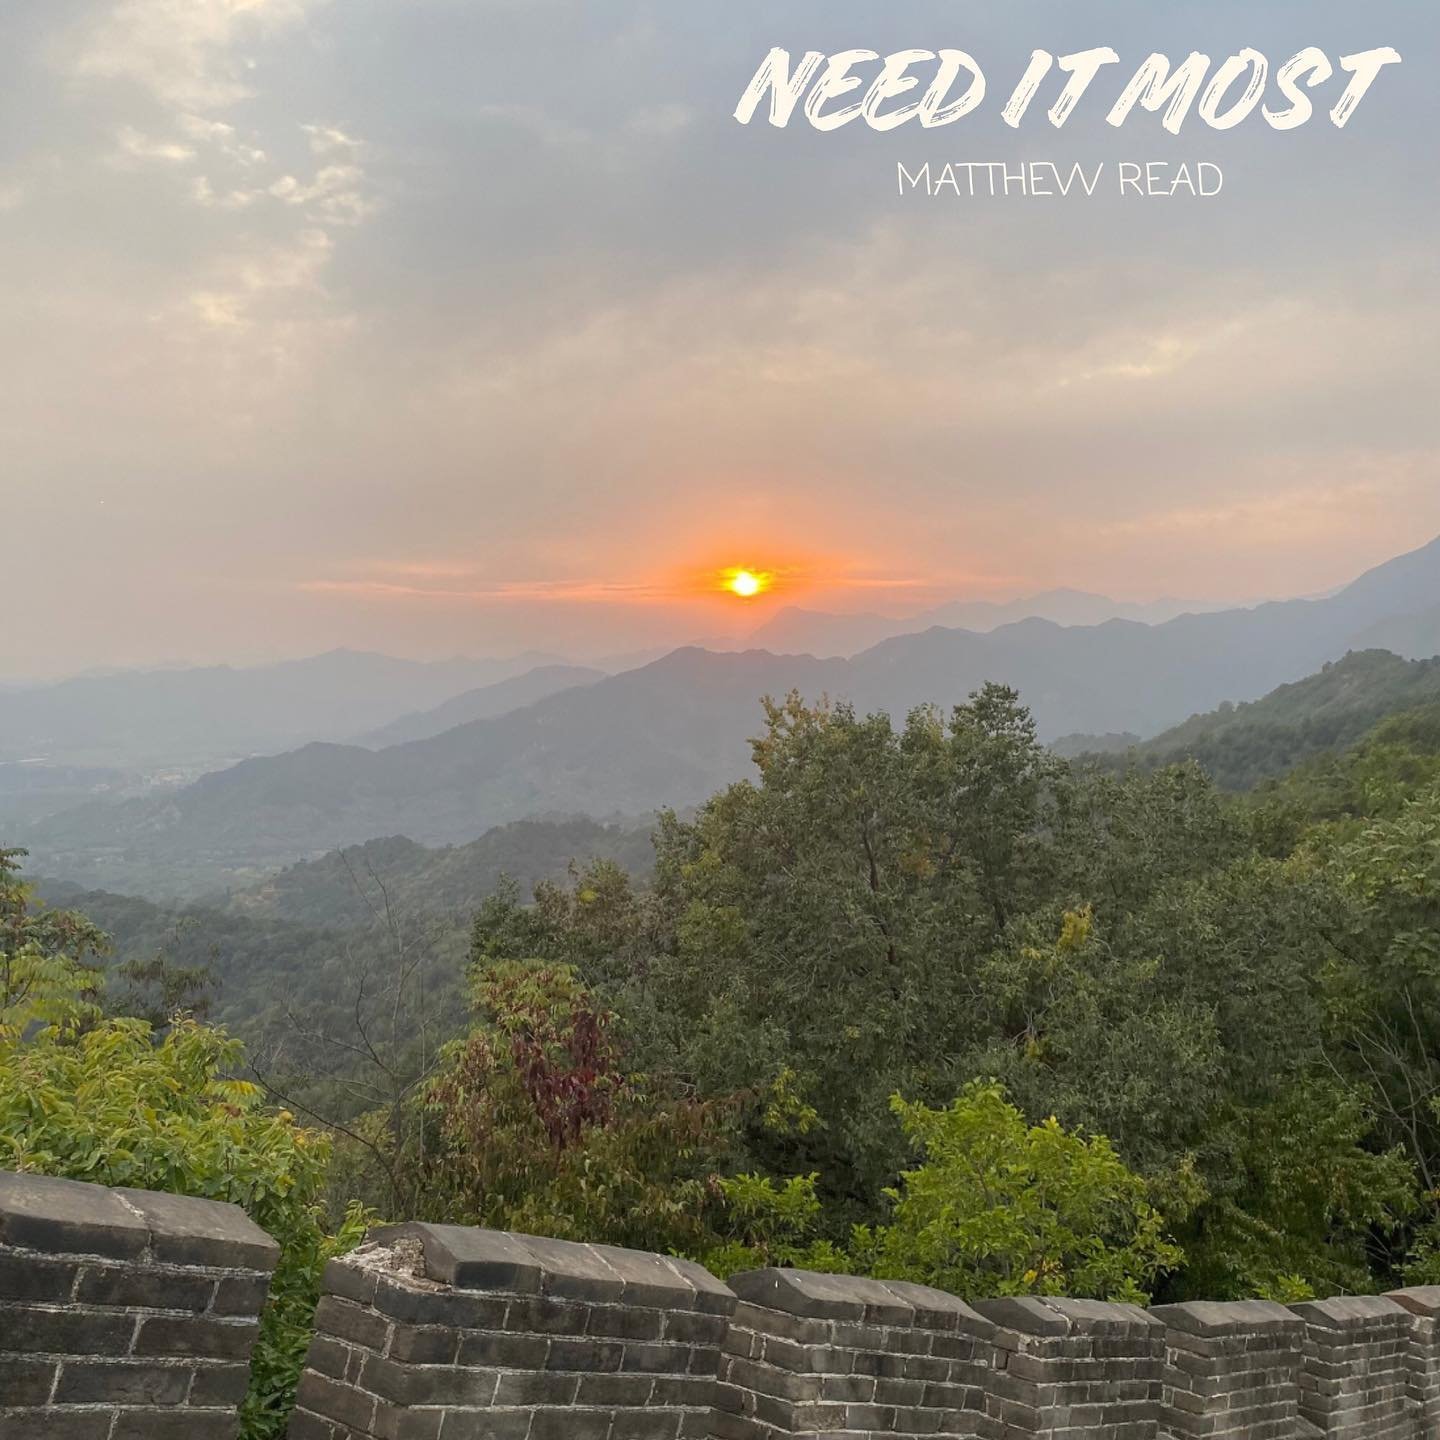 &lsquo;Need It Most&rsquo; by Matthew Read: Making Light During the Darkest Times

Matthew Read's single, &quot;Need It Most,&quot; emerges as a deeply personal and introspective offering from the artist. Read&rsquo;s upcoming EP was a form of therap